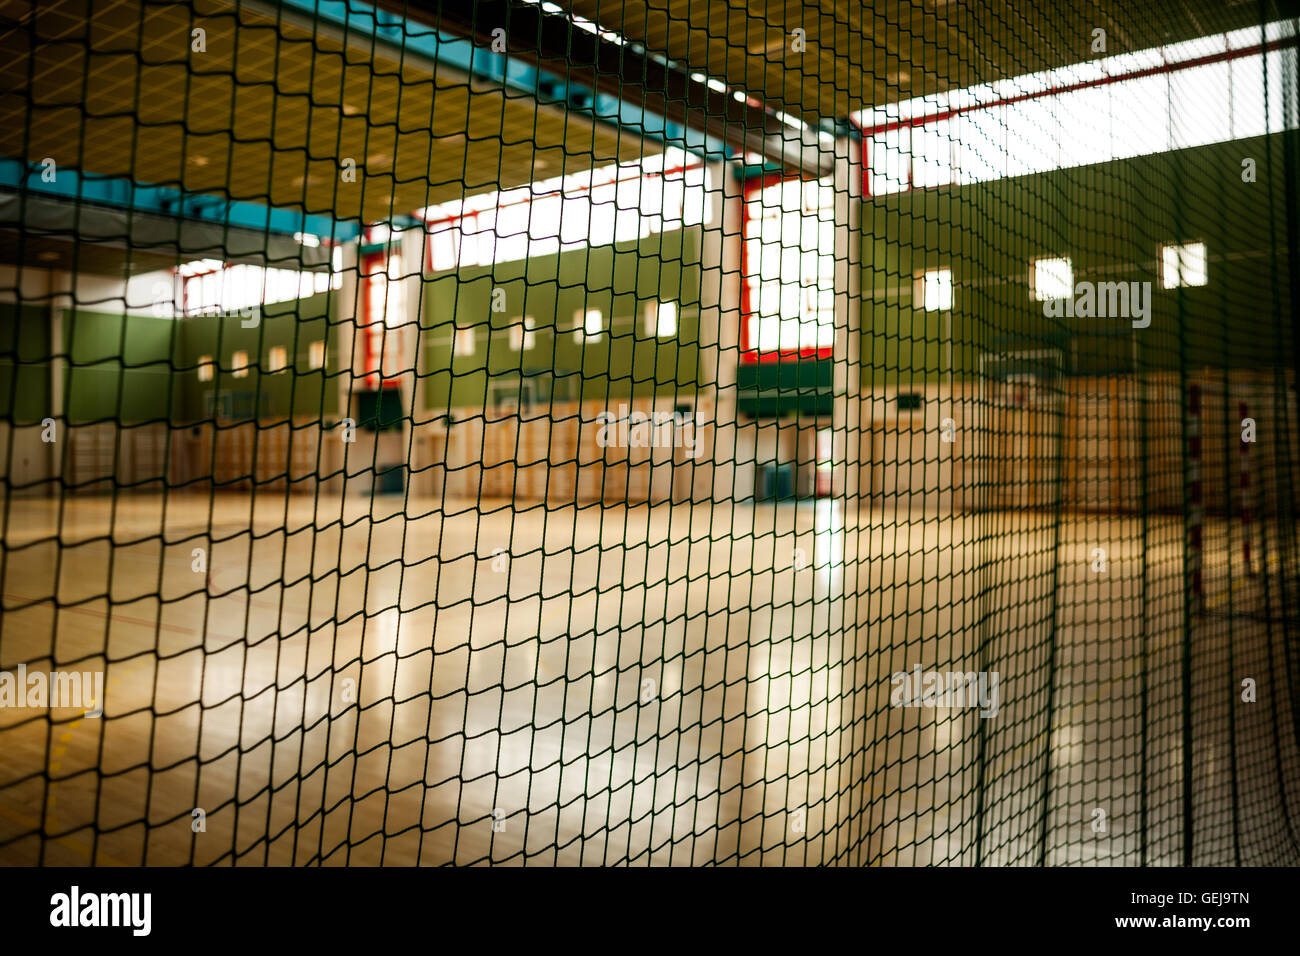 Sport safety net against a sports hall Stock Photo